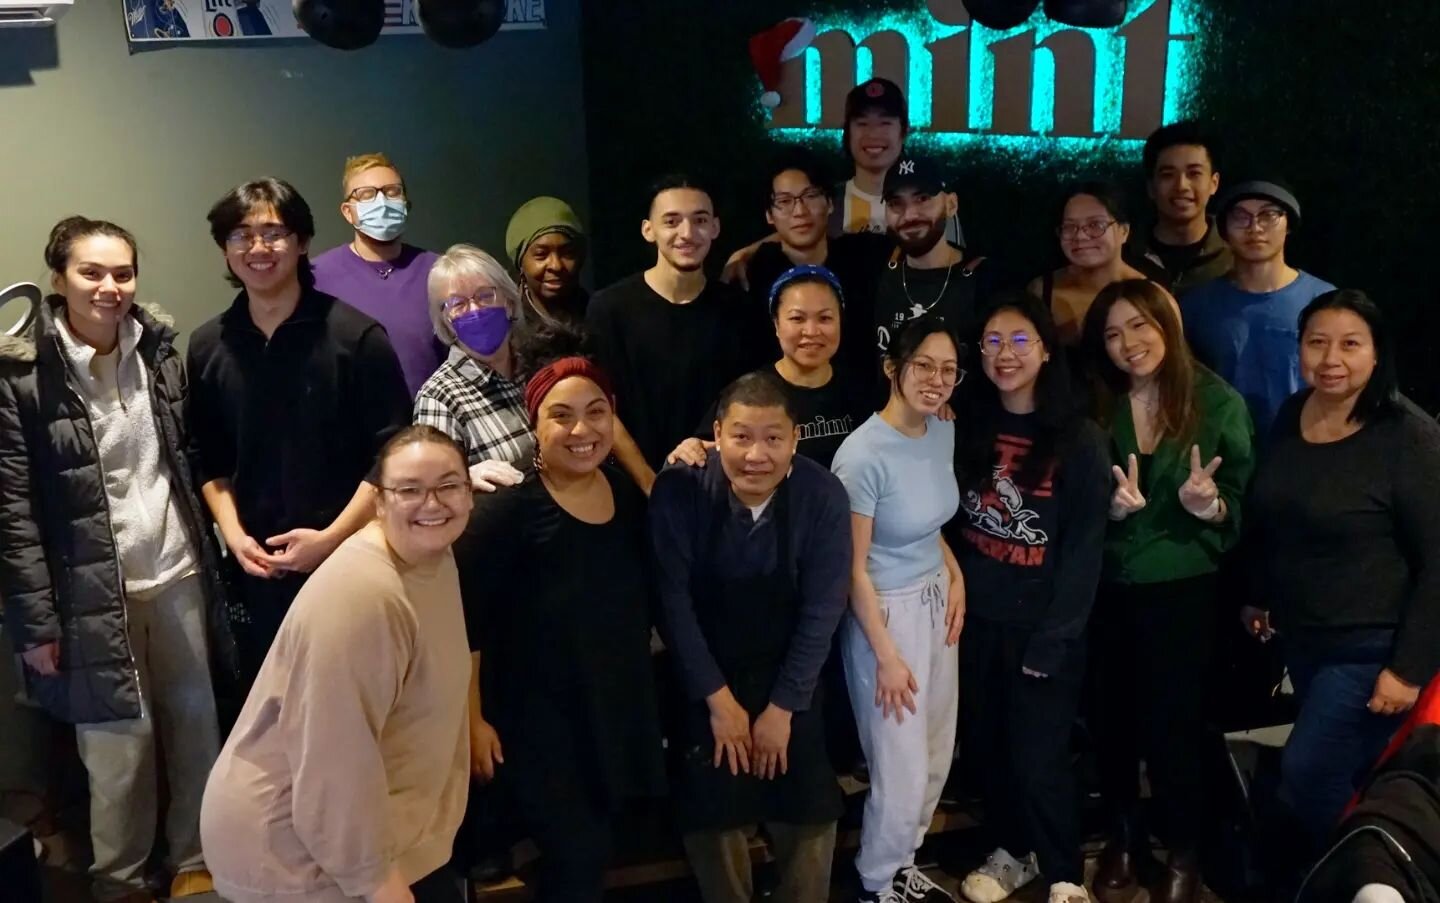 Community is love in action ❤️ We loved working with so many neighbors to serve 500 free meals this past Sunday!

Trang Le, her family and friends, and the amazing team at @mintworcester are the heart of this effort. We got so many messages from neig